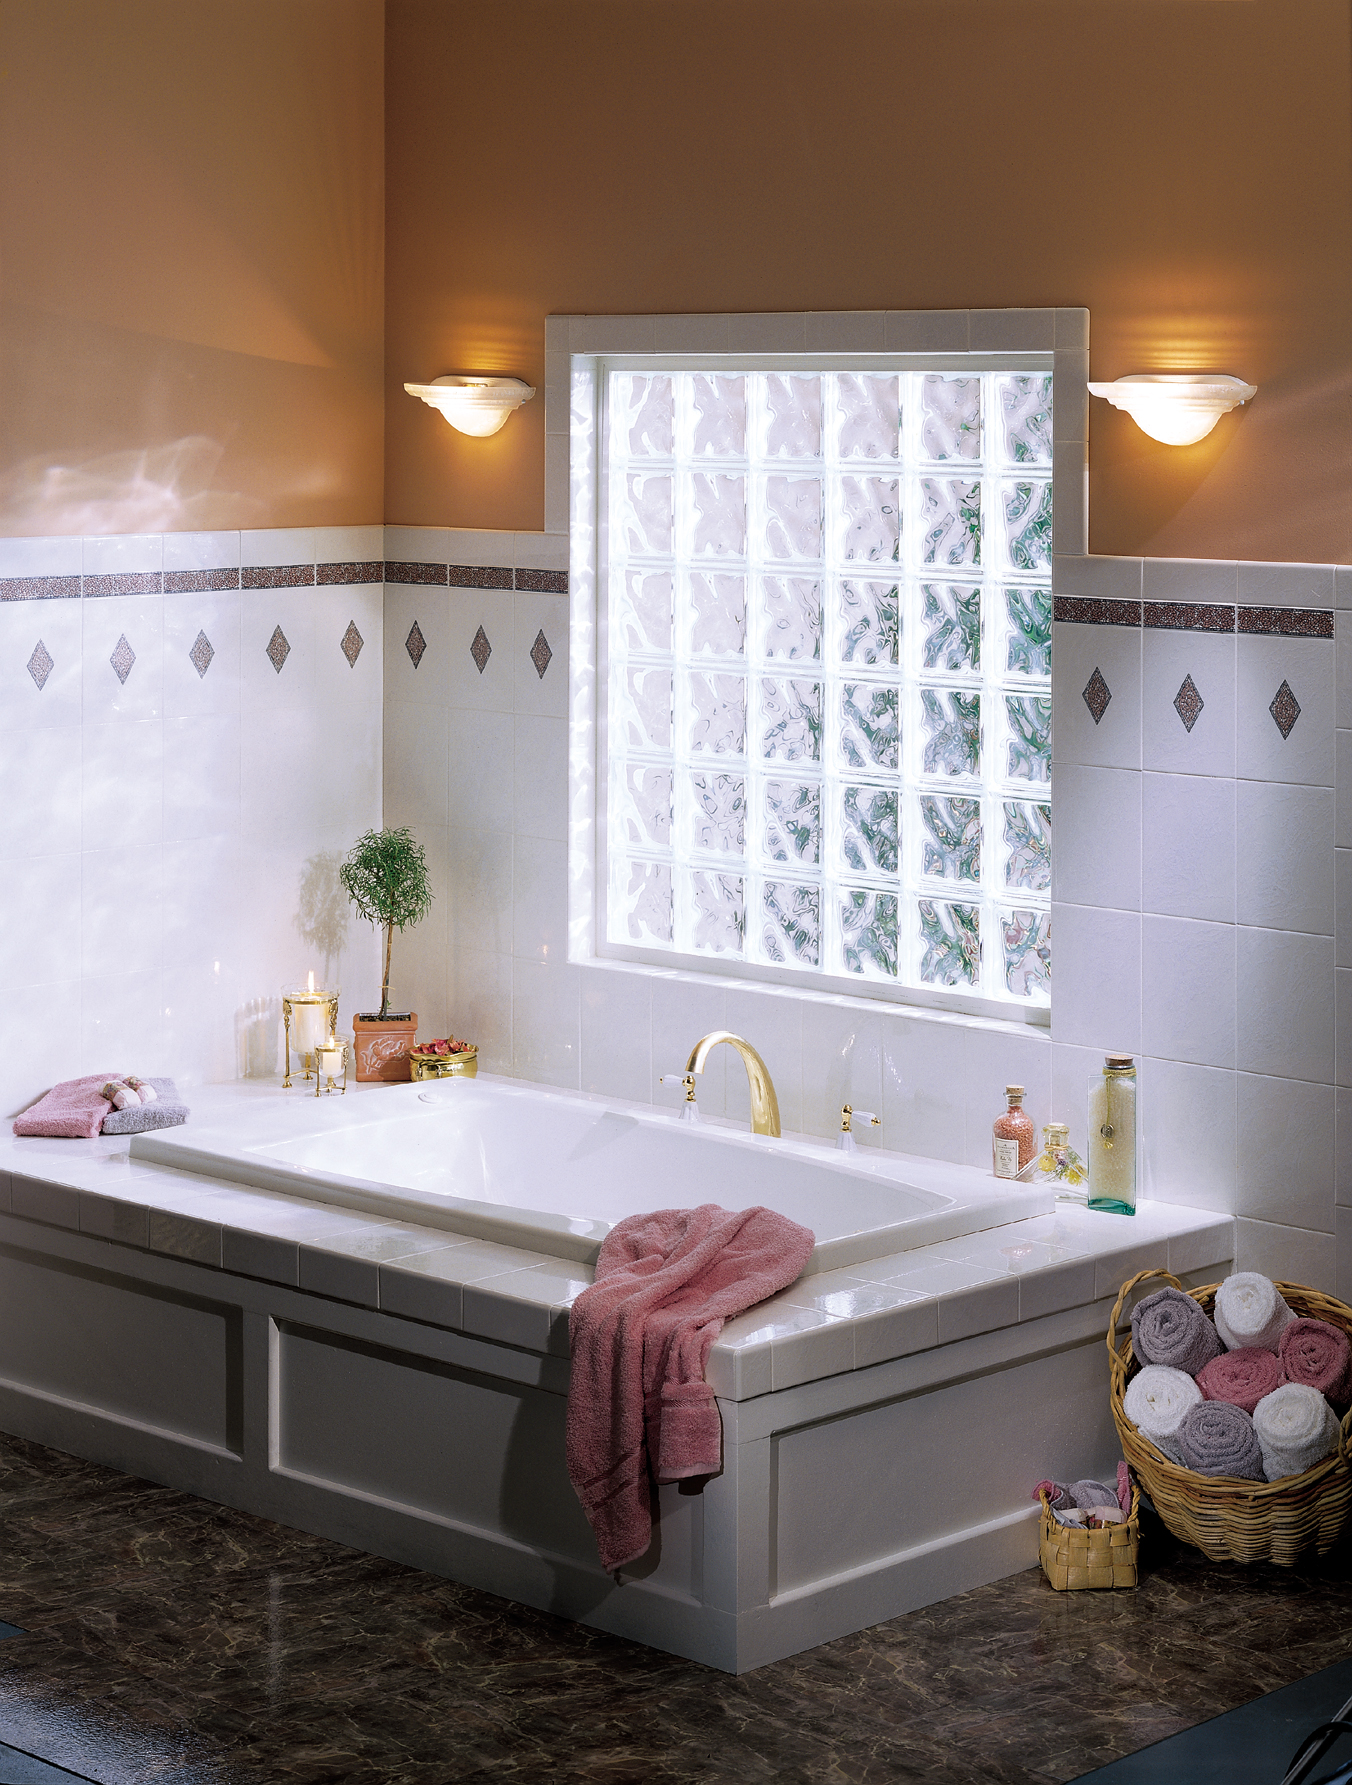 Pittsburgh Corning Glass Block can add a safety factor to your bath.